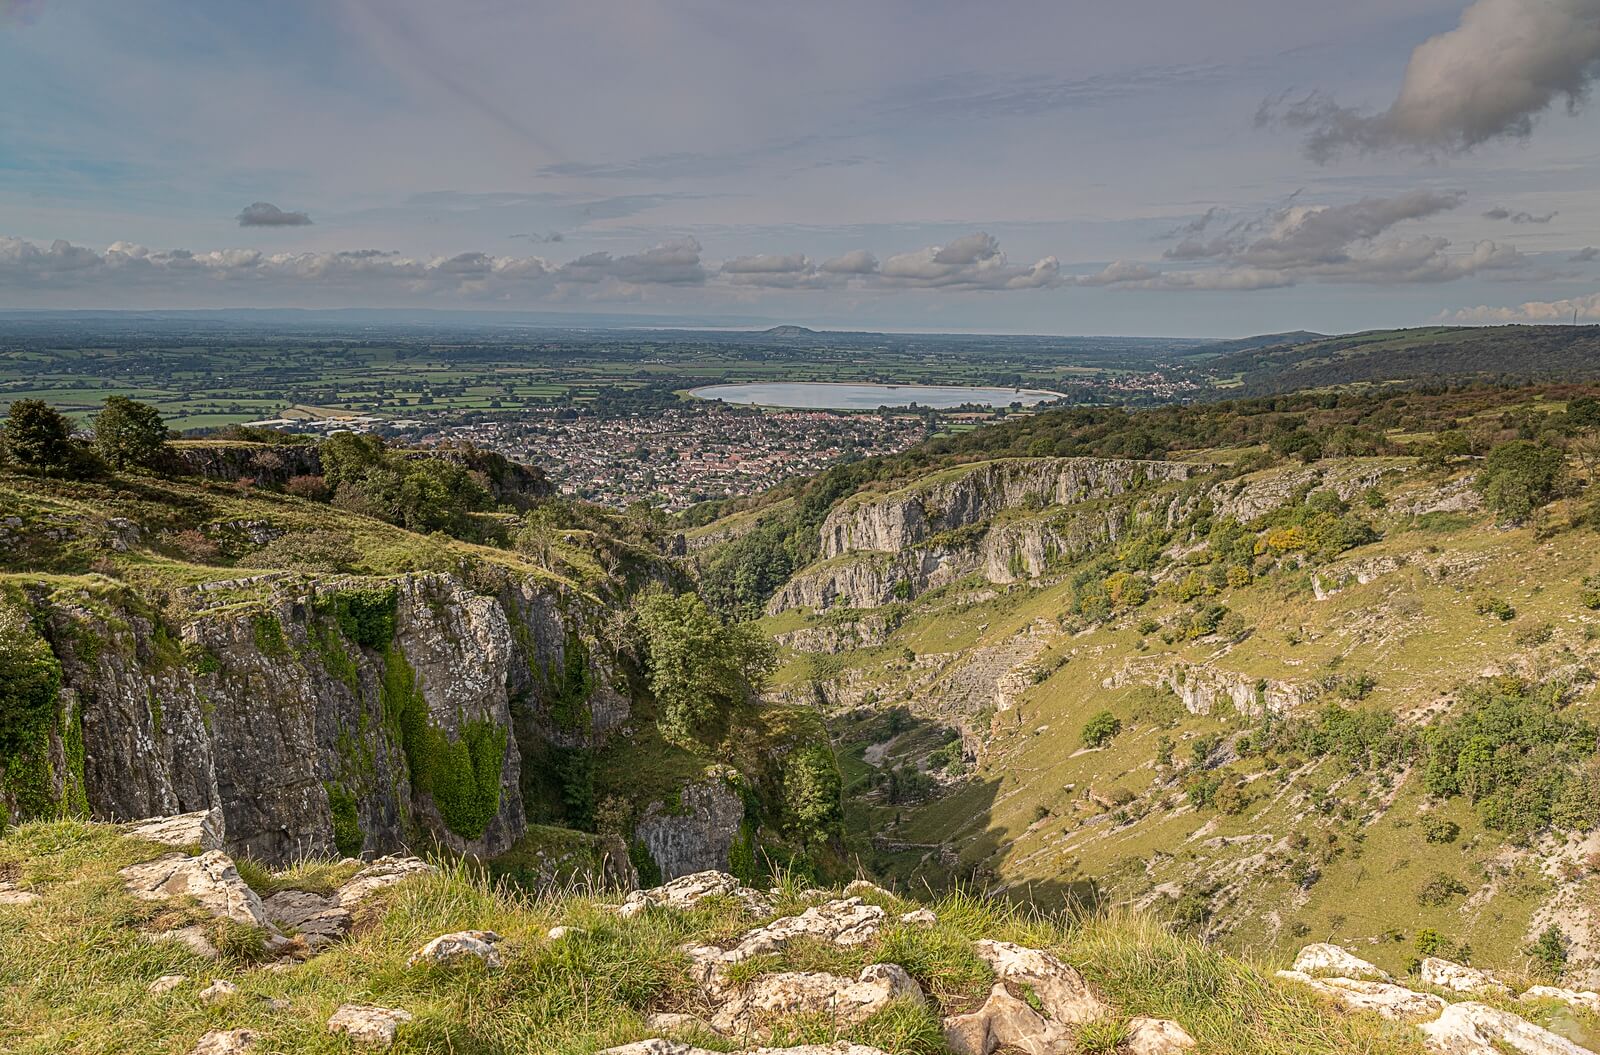 Image of Cheddar Gorge (top) by David Drew